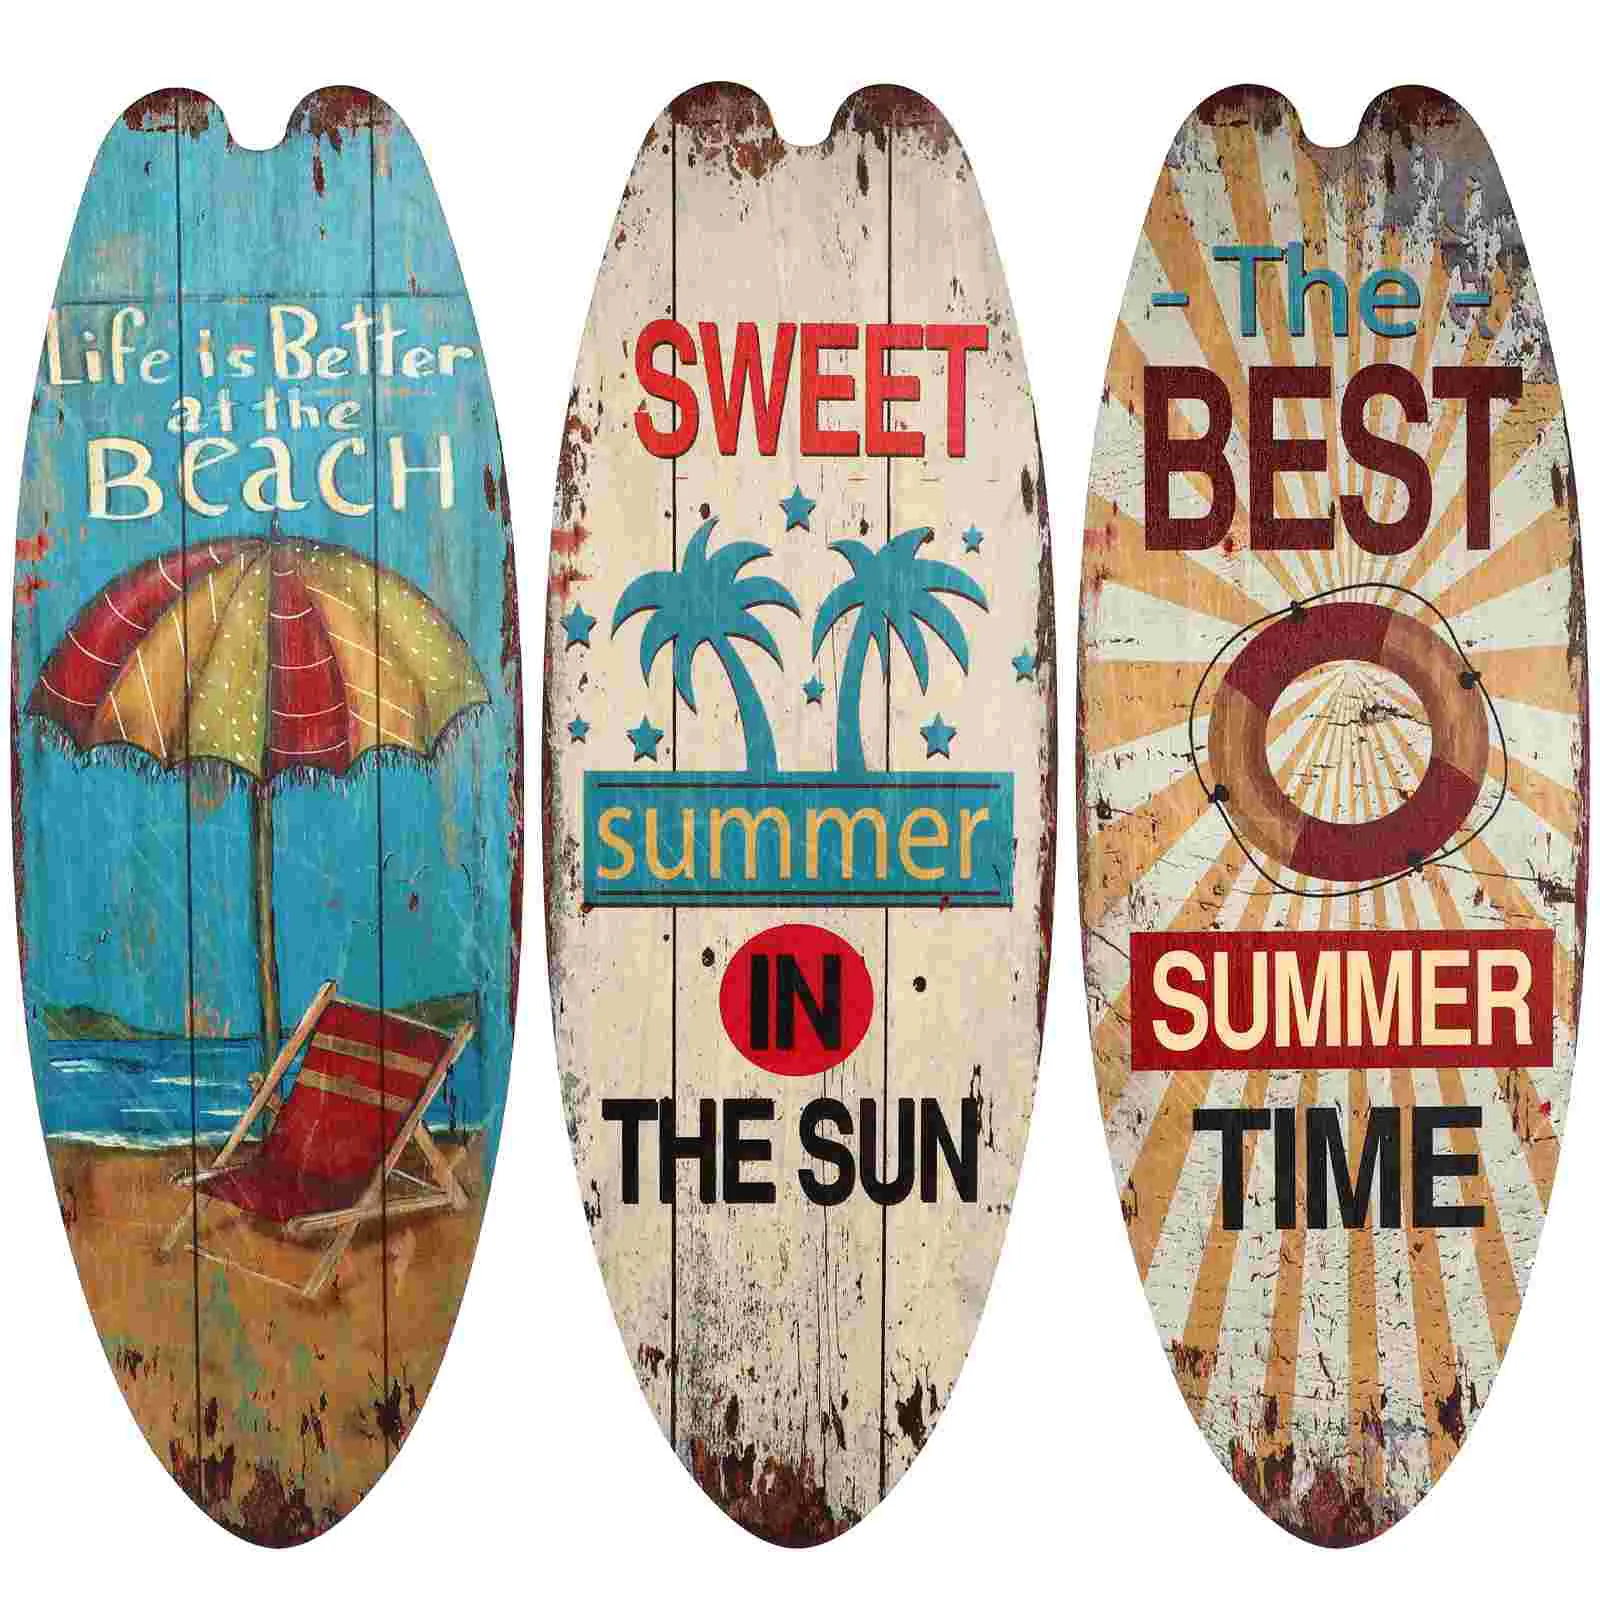 

3 Pcs Surfboard Wooden Sign Hanging Ornament Porch Decoration Summer Decorations Home Decorate Coffee Shop Plaque Seaside Ocean